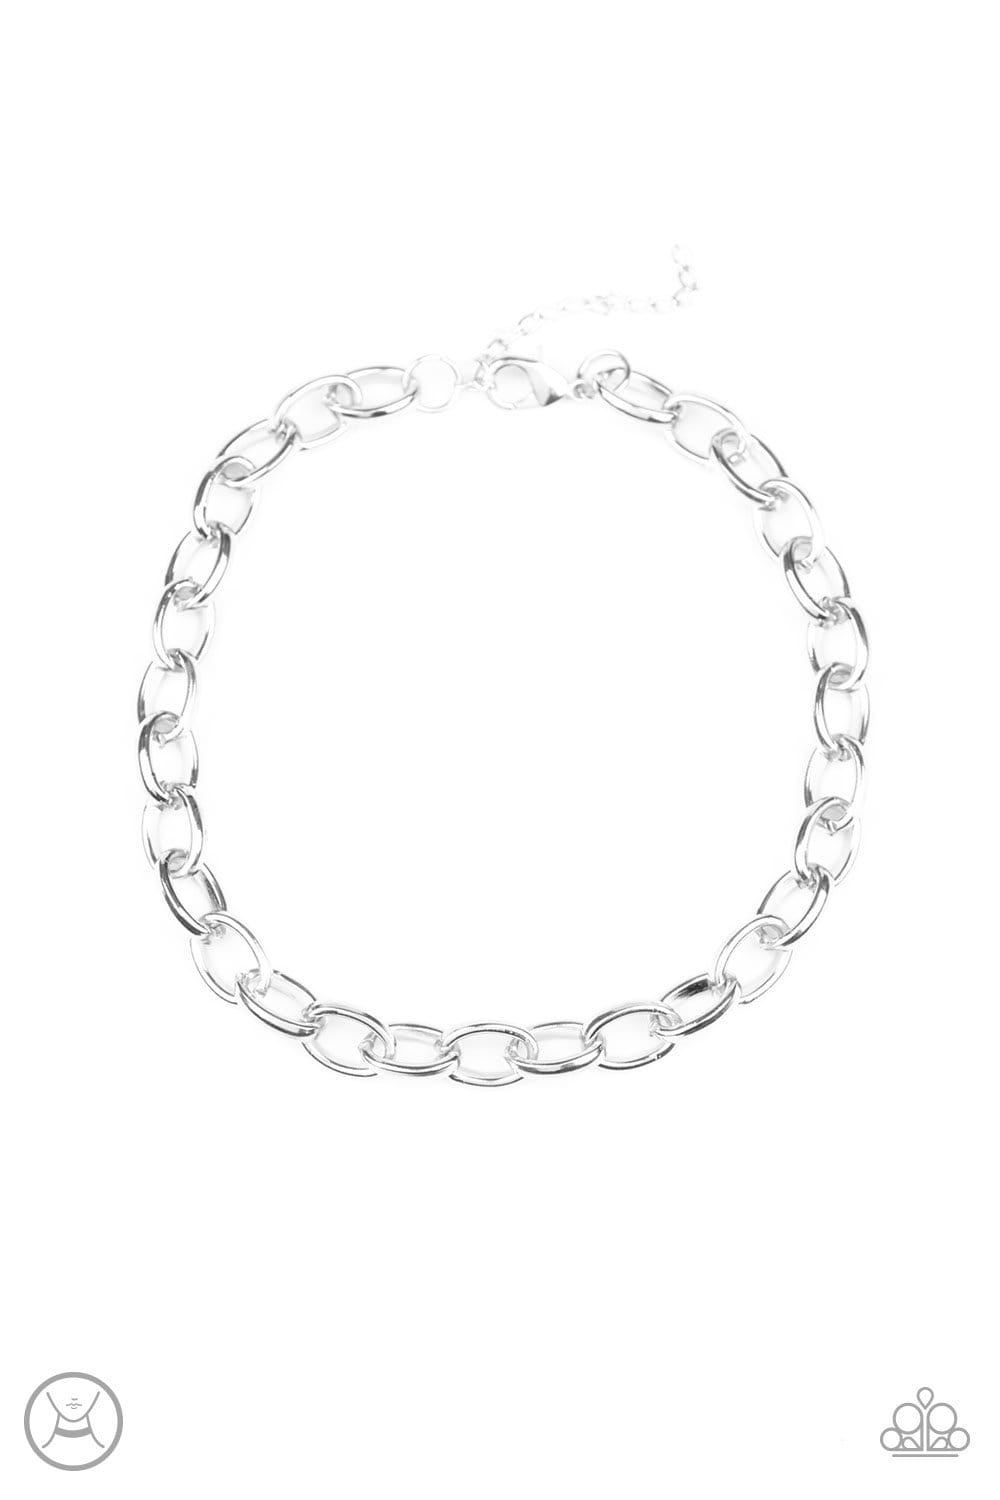 Paparazzi Accessories: Urban Uplink Thingz N\' Silver - Choker Necklace Boutique – Jewels